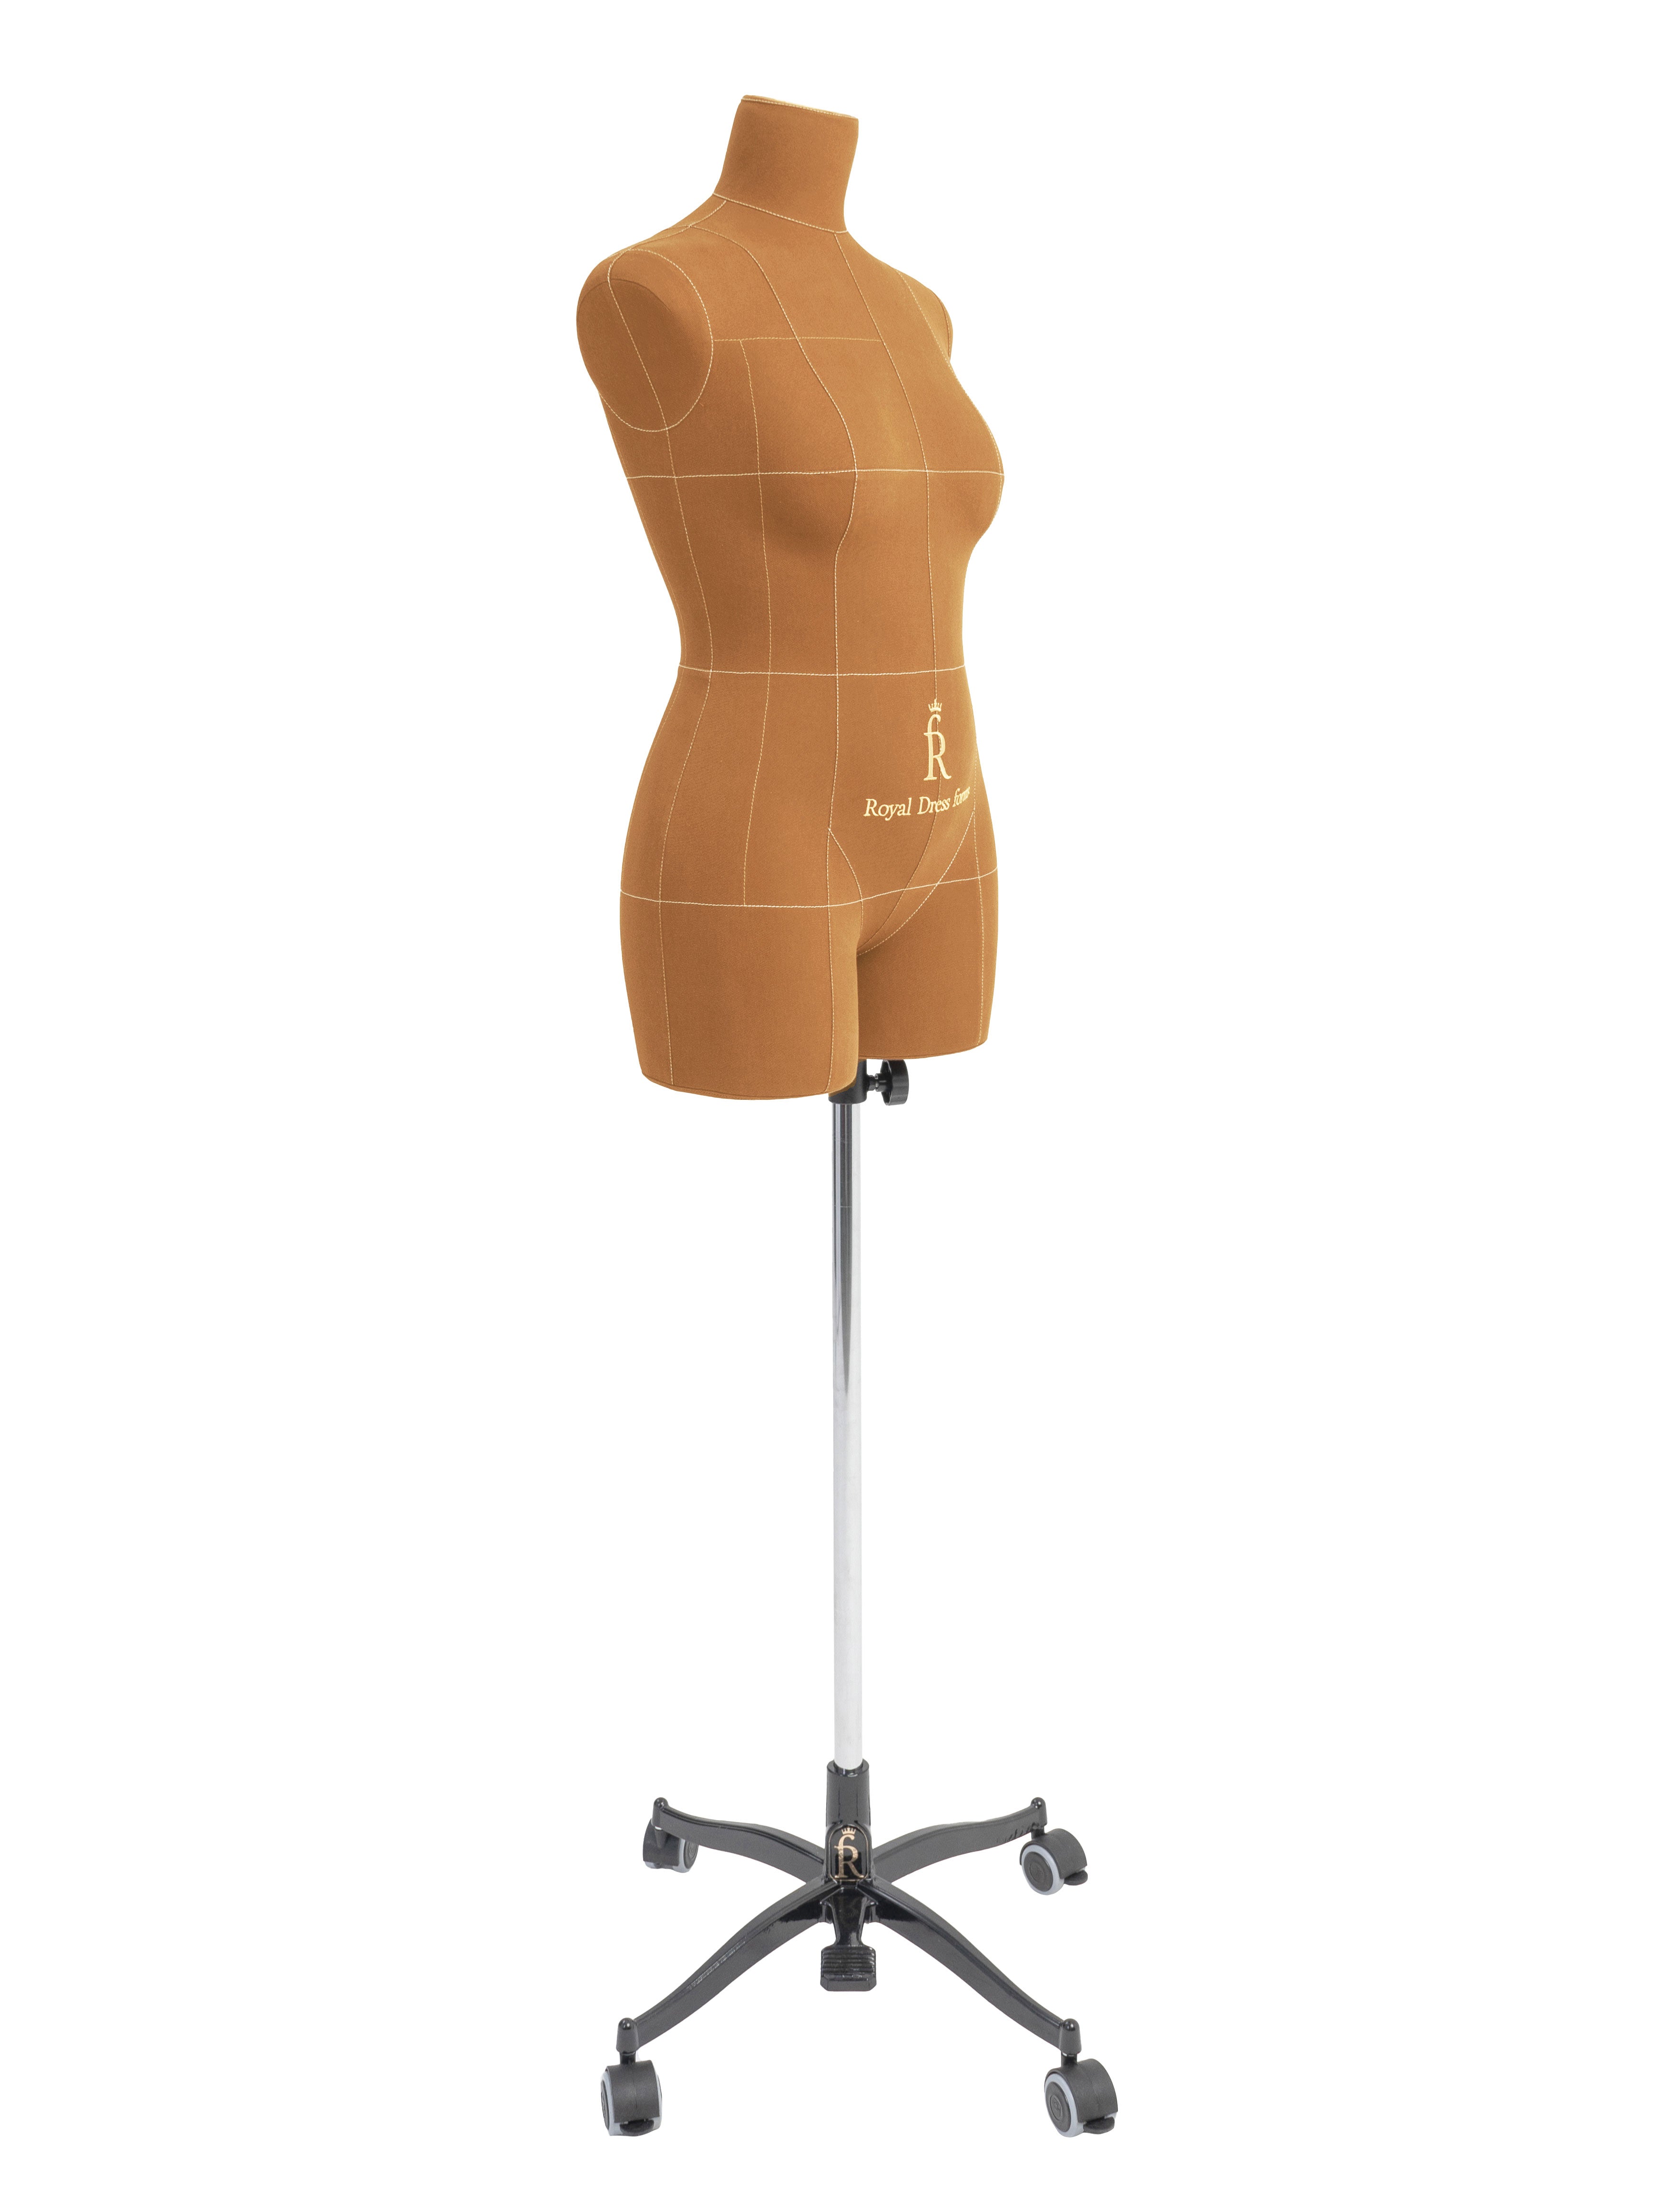 Beifuform Male Dress Form Mannequin Dummy Manikin USA ASTM Men Size 38 Half  Body Torso - China Mannequin and Dress Form price | Made-in-China.com